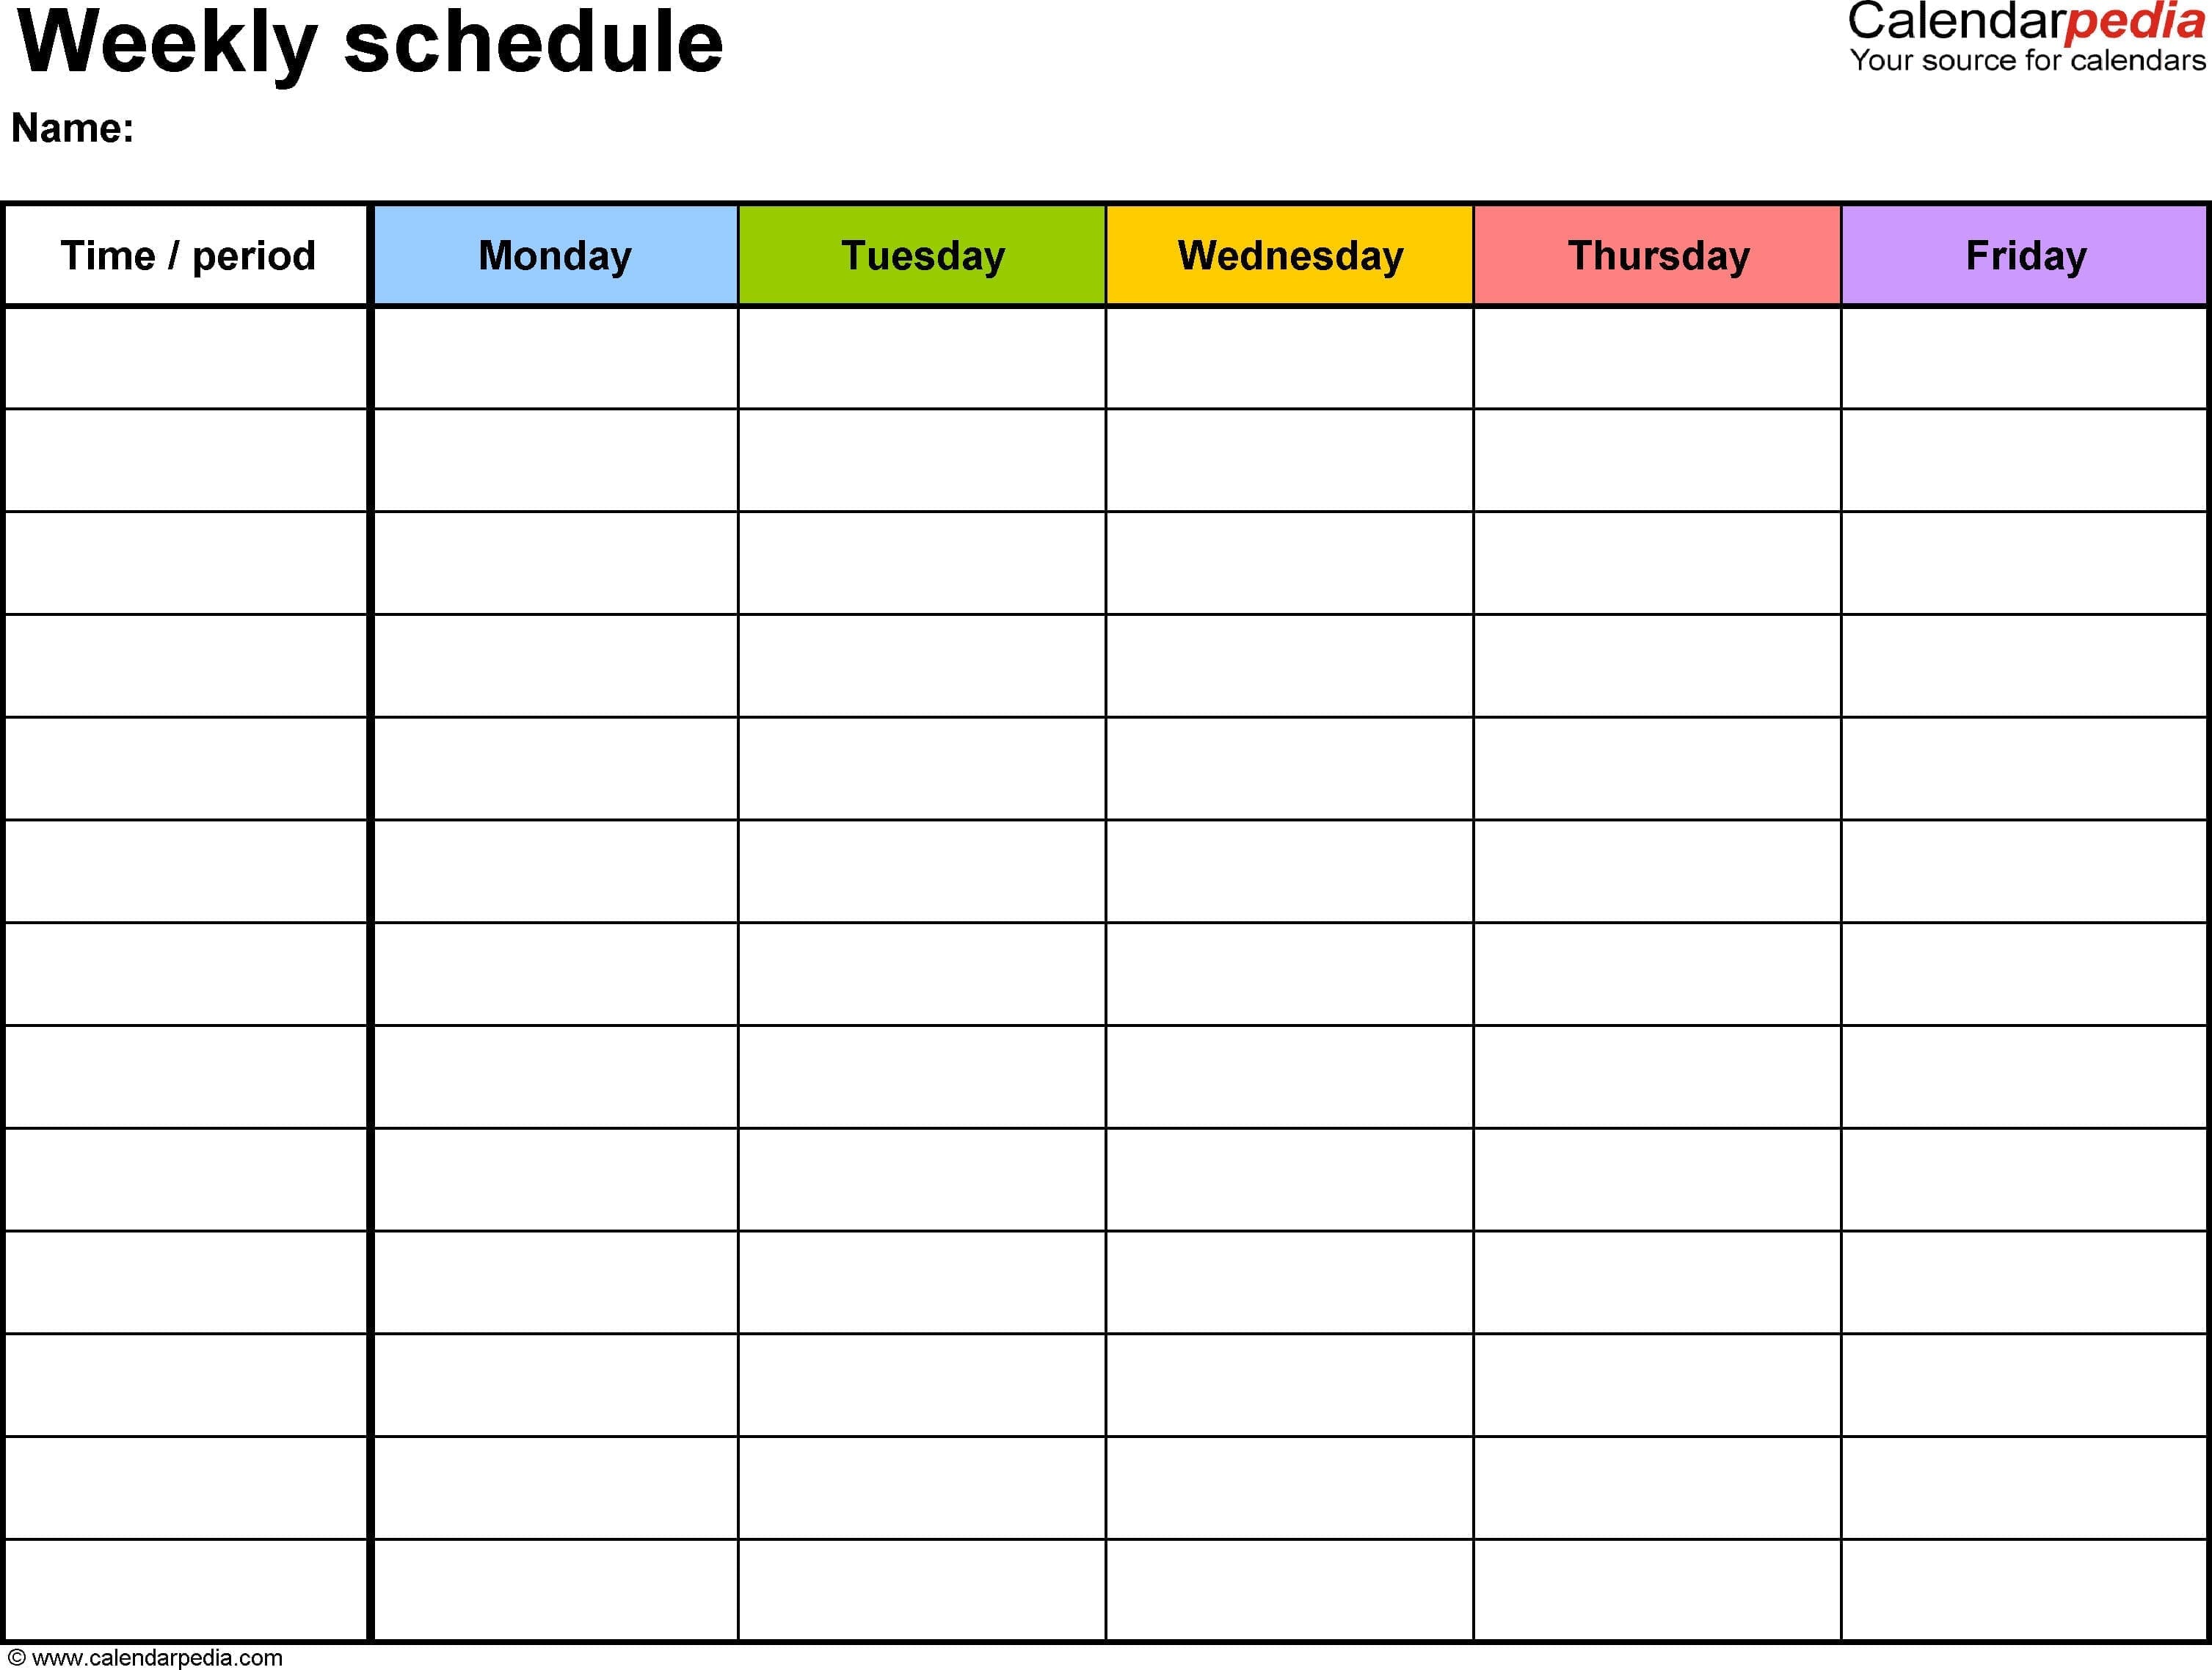 Free Weekly Schedule Templates For Excel  18 Templates Throughout Schedule Worksheet Templates